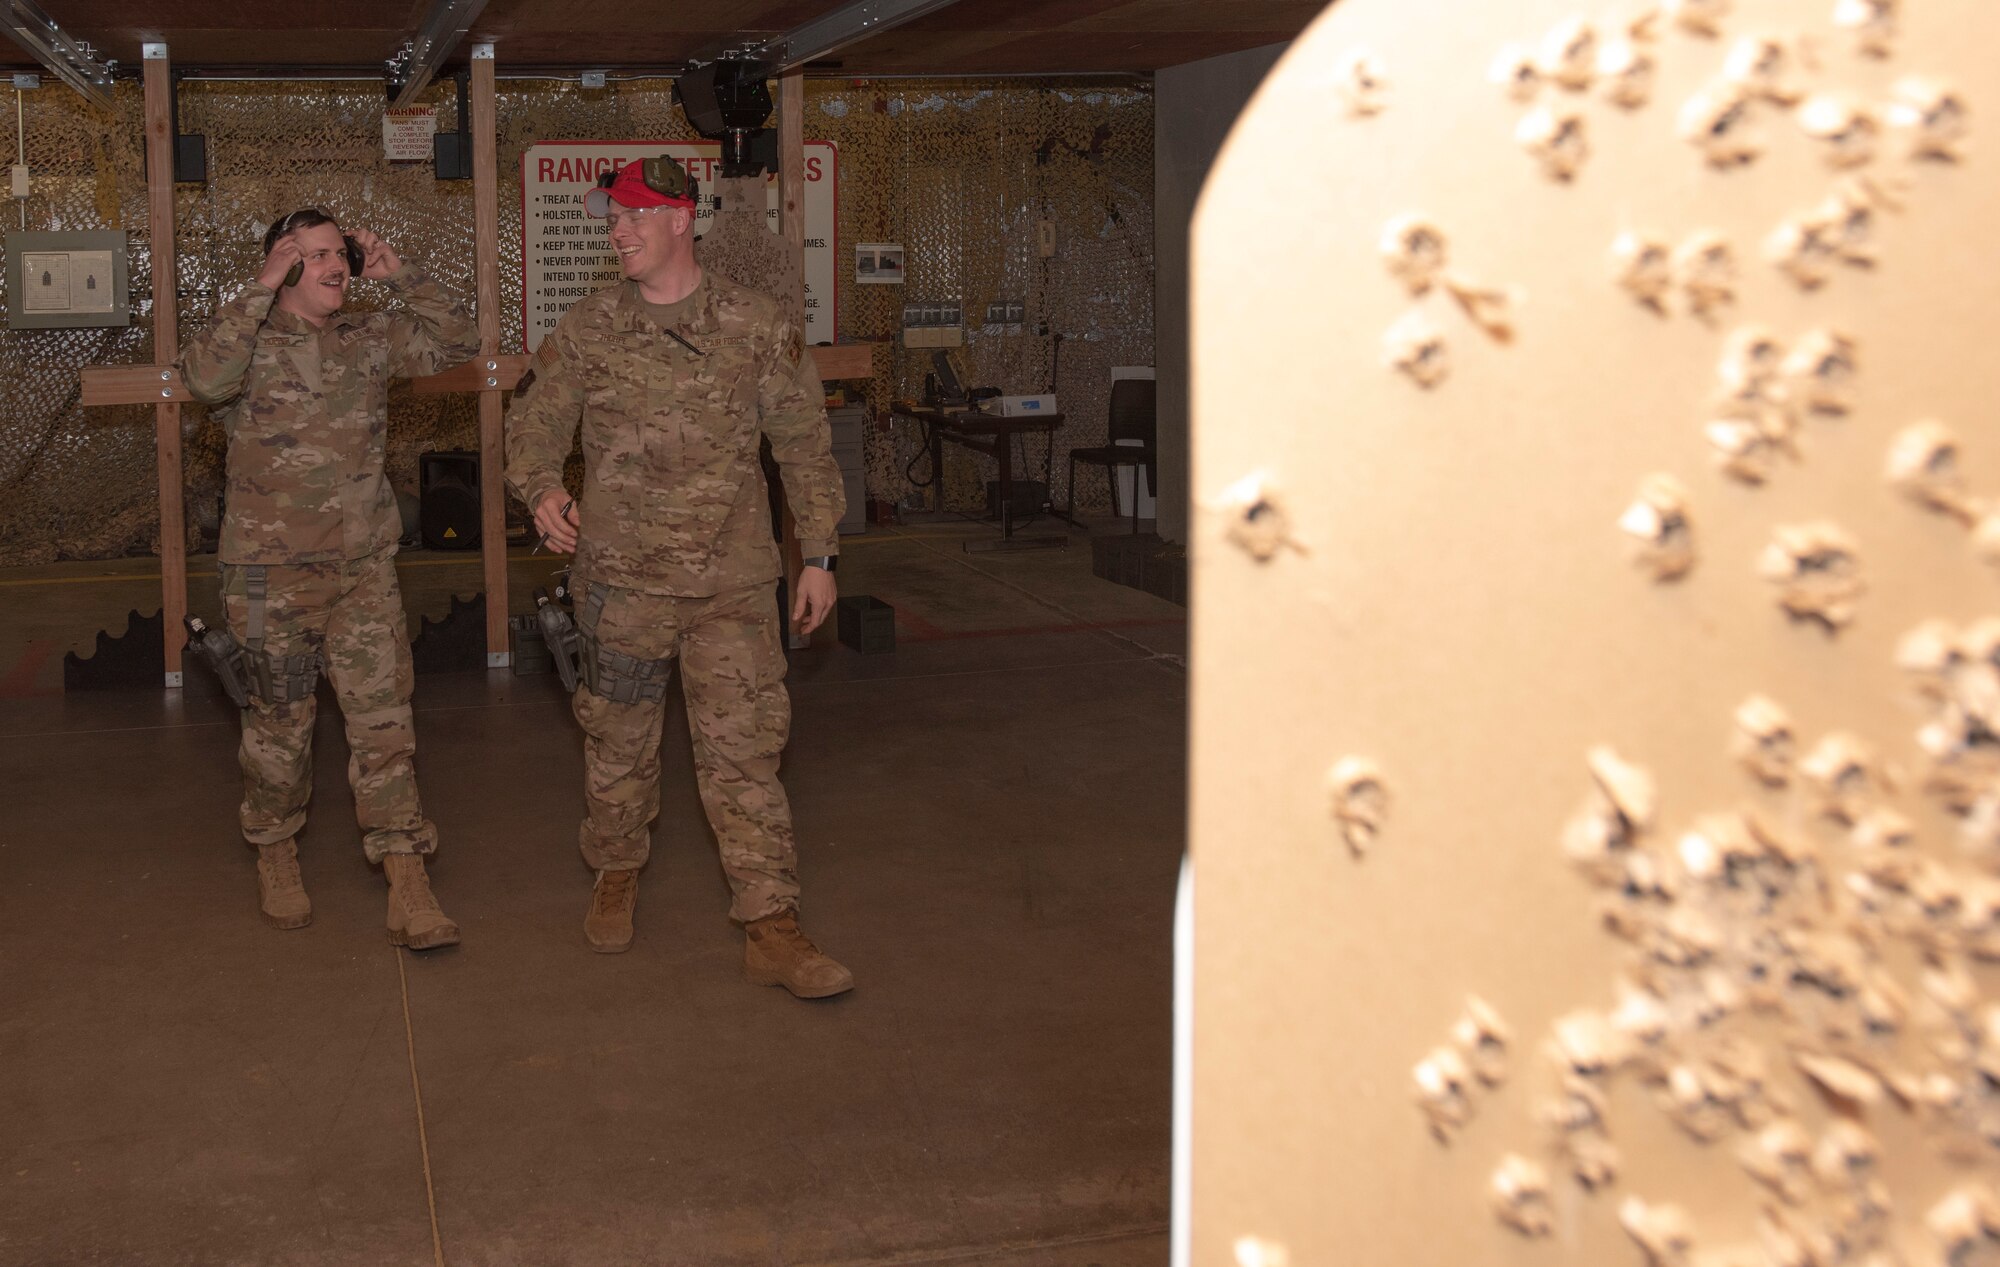 Senior Airman Hopper, 50th Security Force Squadron resource and logistics (left) and Senior Airman Spencer Thorpe, 50th Security Forces Squadron combat arms instructor, walk to inspect the target after Hopper’s line of fire at the 50th Security Forces shooting range at Schriever Air Force Base, Colorado, March 8, 2019. Hopper’s proficiency was being conducted in advance of an upcoming training event. (U.S. Air Force Photo by Staff Sgt. Matthew Coleman-Foster)